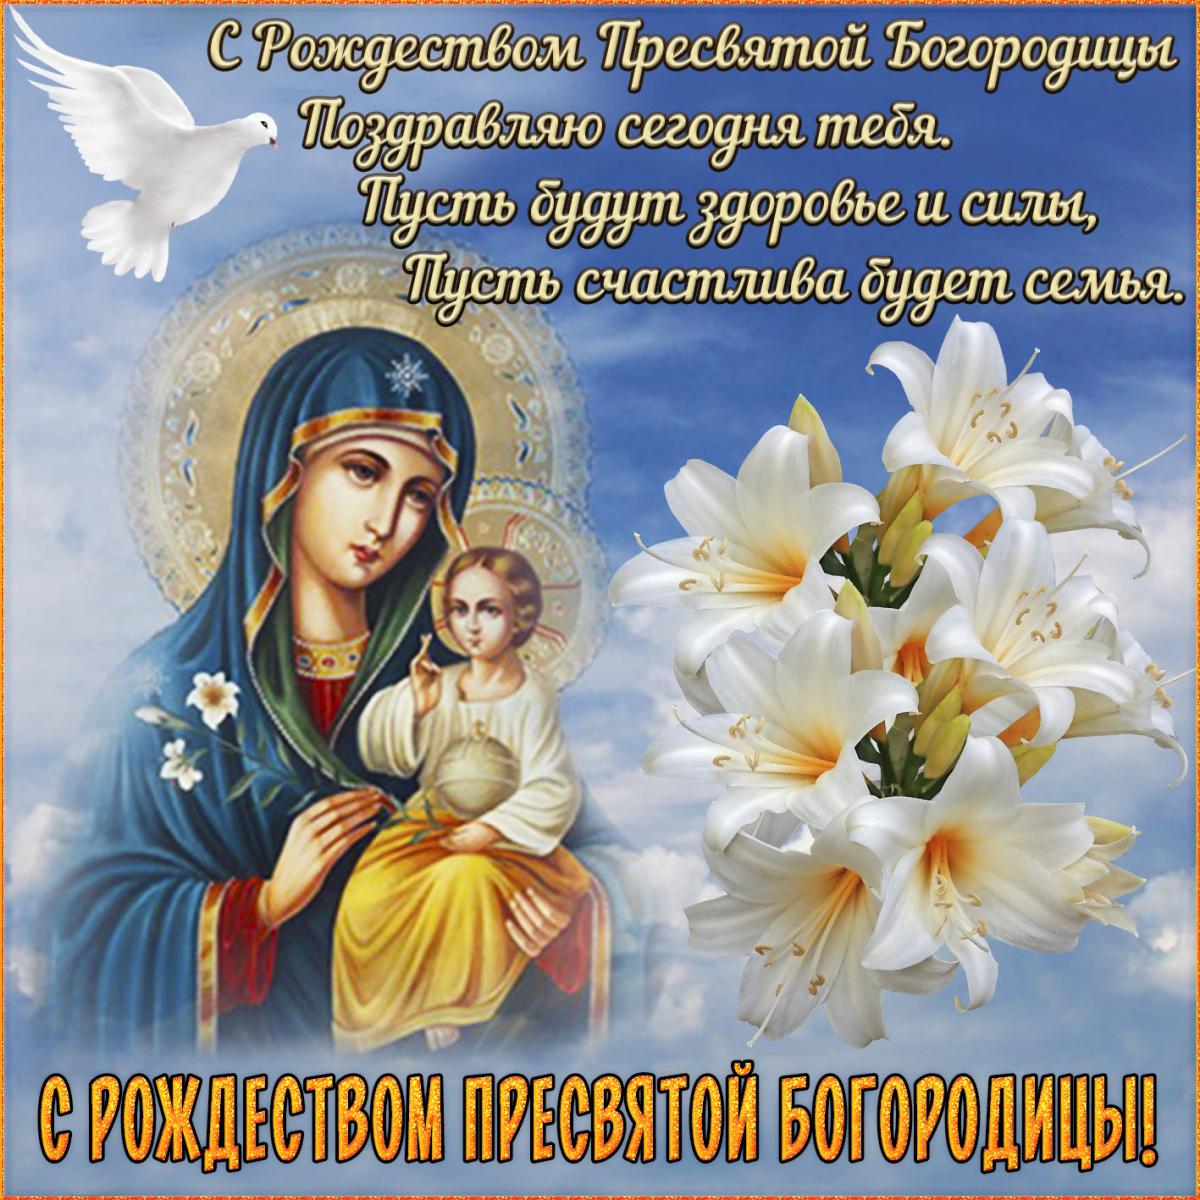 Merry Christmas of the Blessed Virgin Mary - pictures / bonnycards.ru